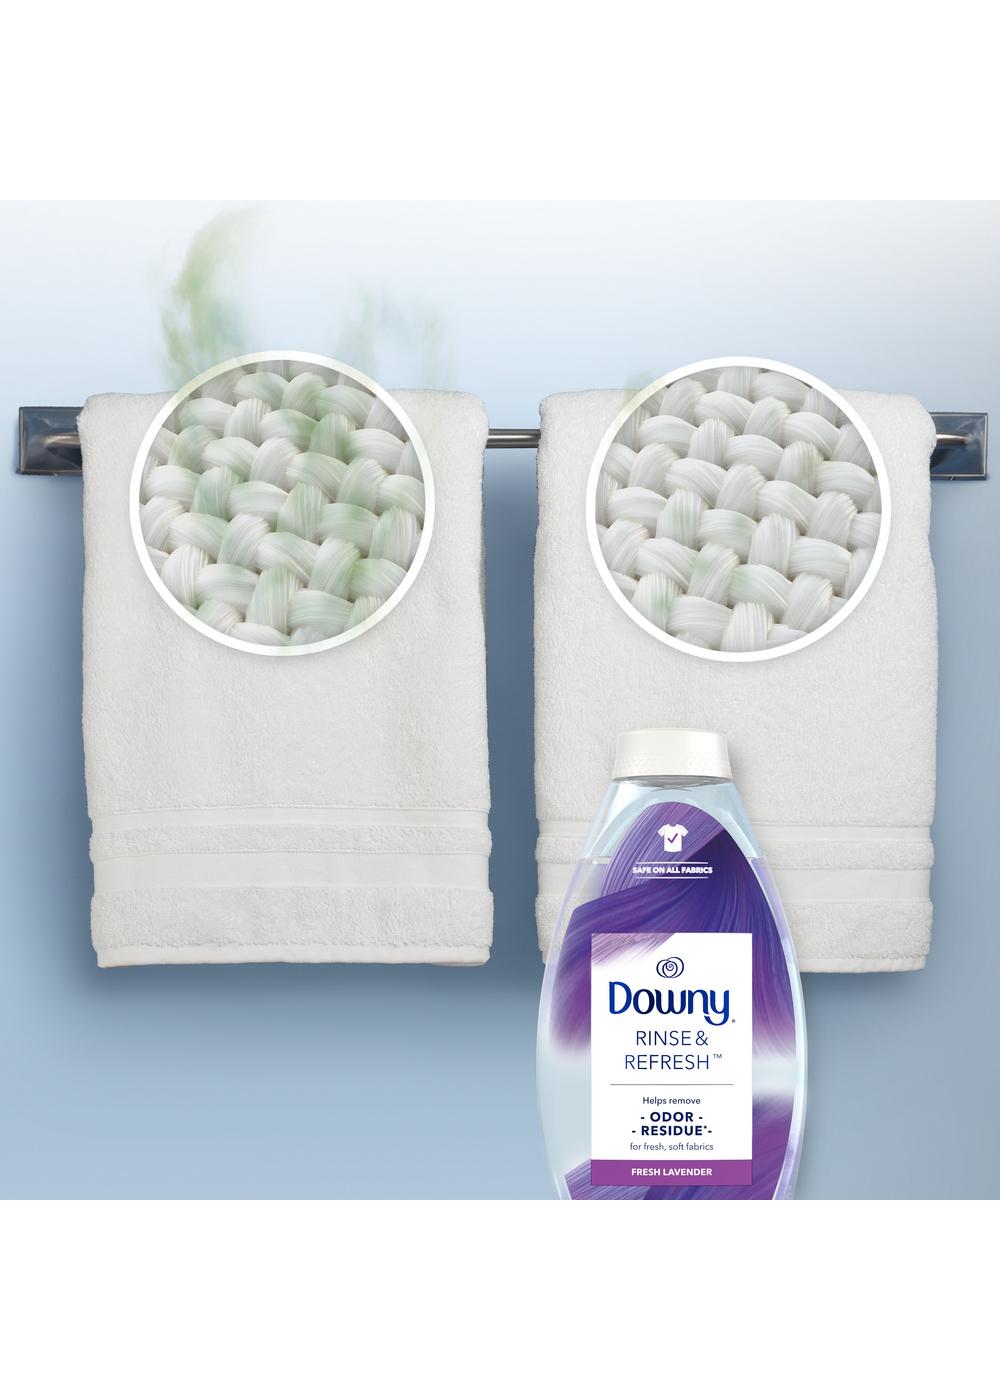 Downy Rinse & Refresh Laundry Odor Remover, 70 Loads - Fresh Lavender; image 3 of 4